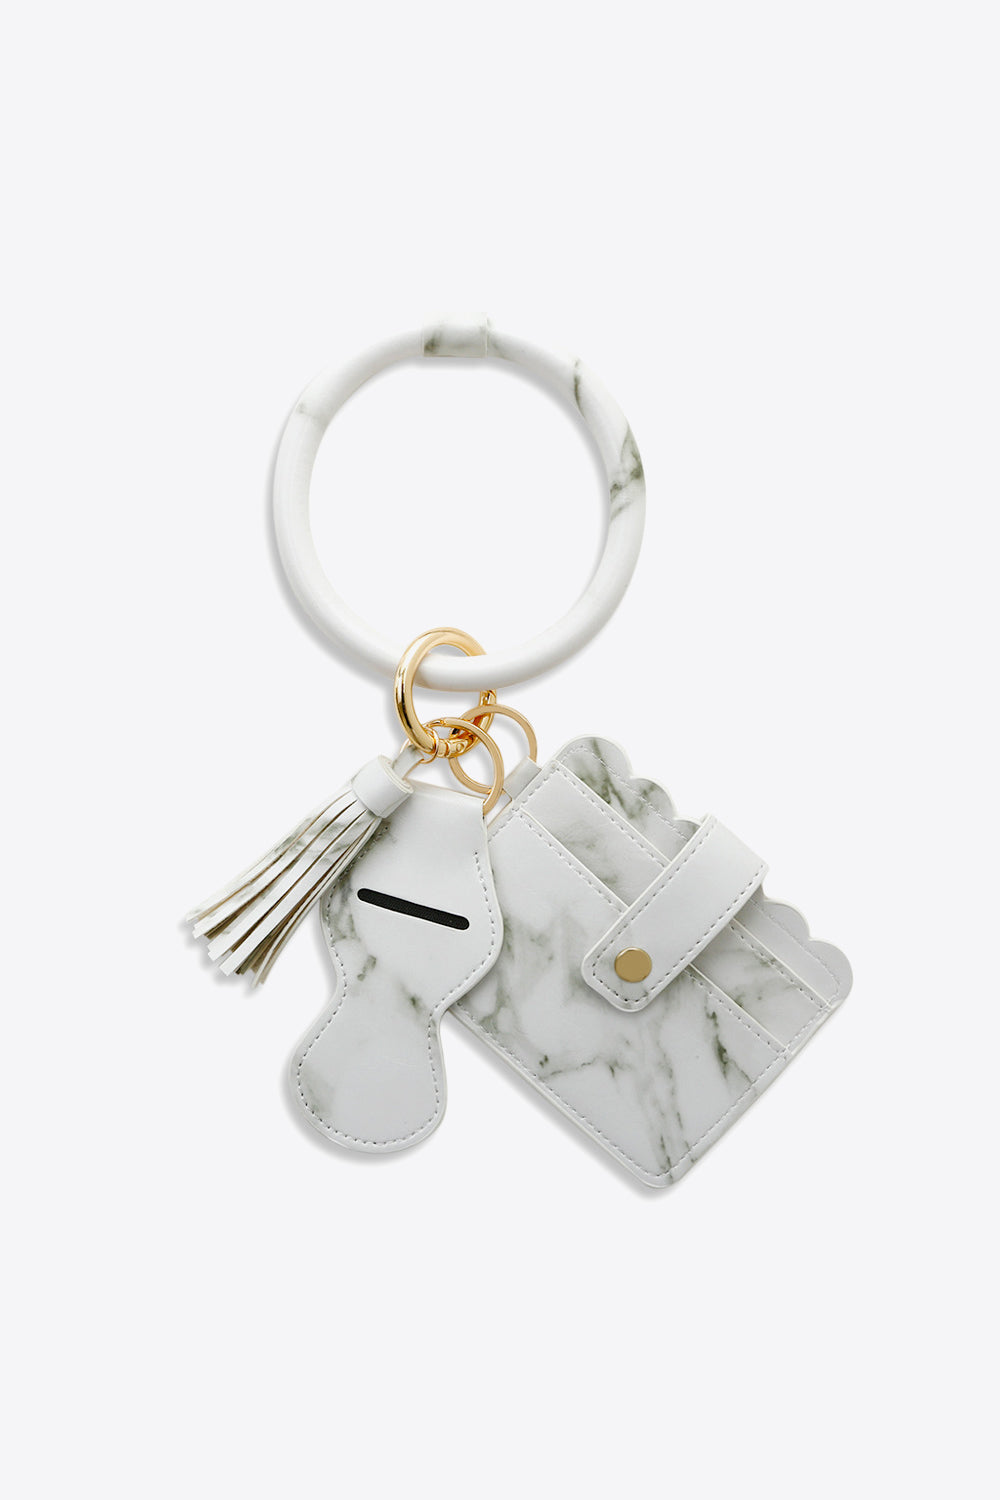 Trendsi Cupid Beauty Supplies White / One Size Keychains PU Wristlet Keychain with Card Holder